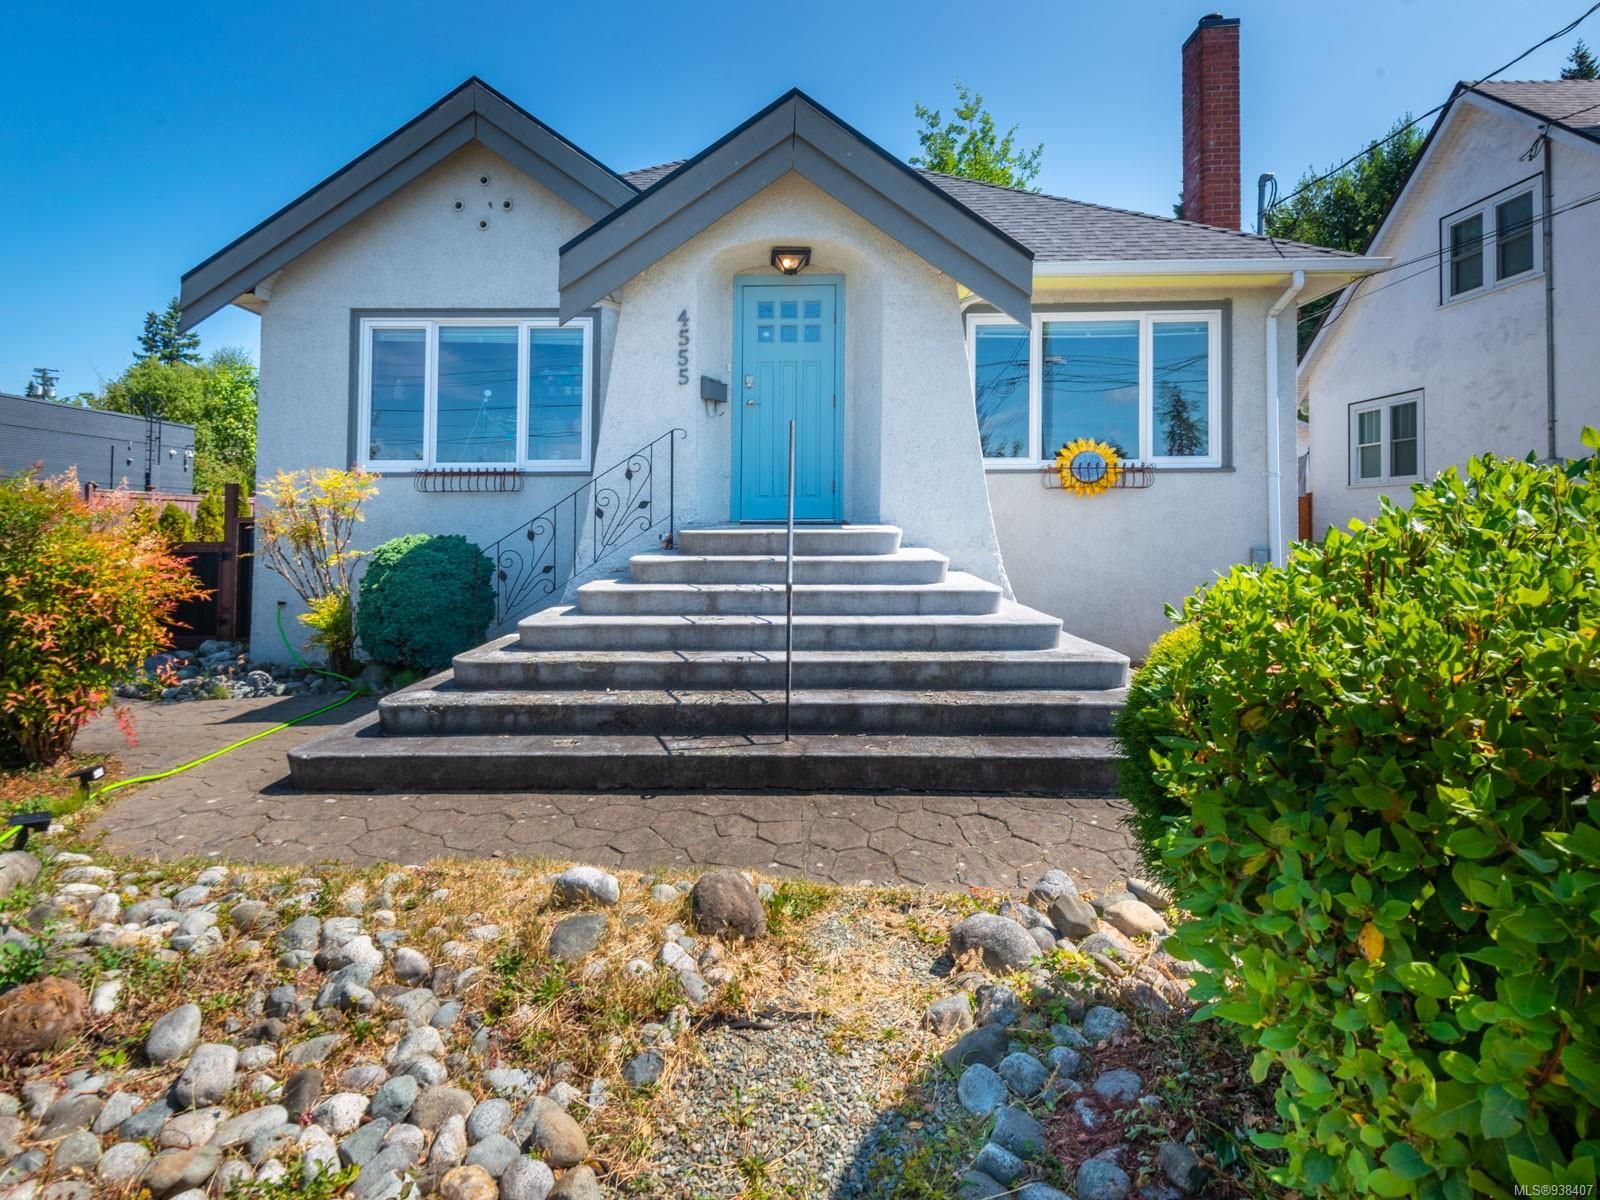 I have sold a property at 4555 Helen St in Port Alberni
